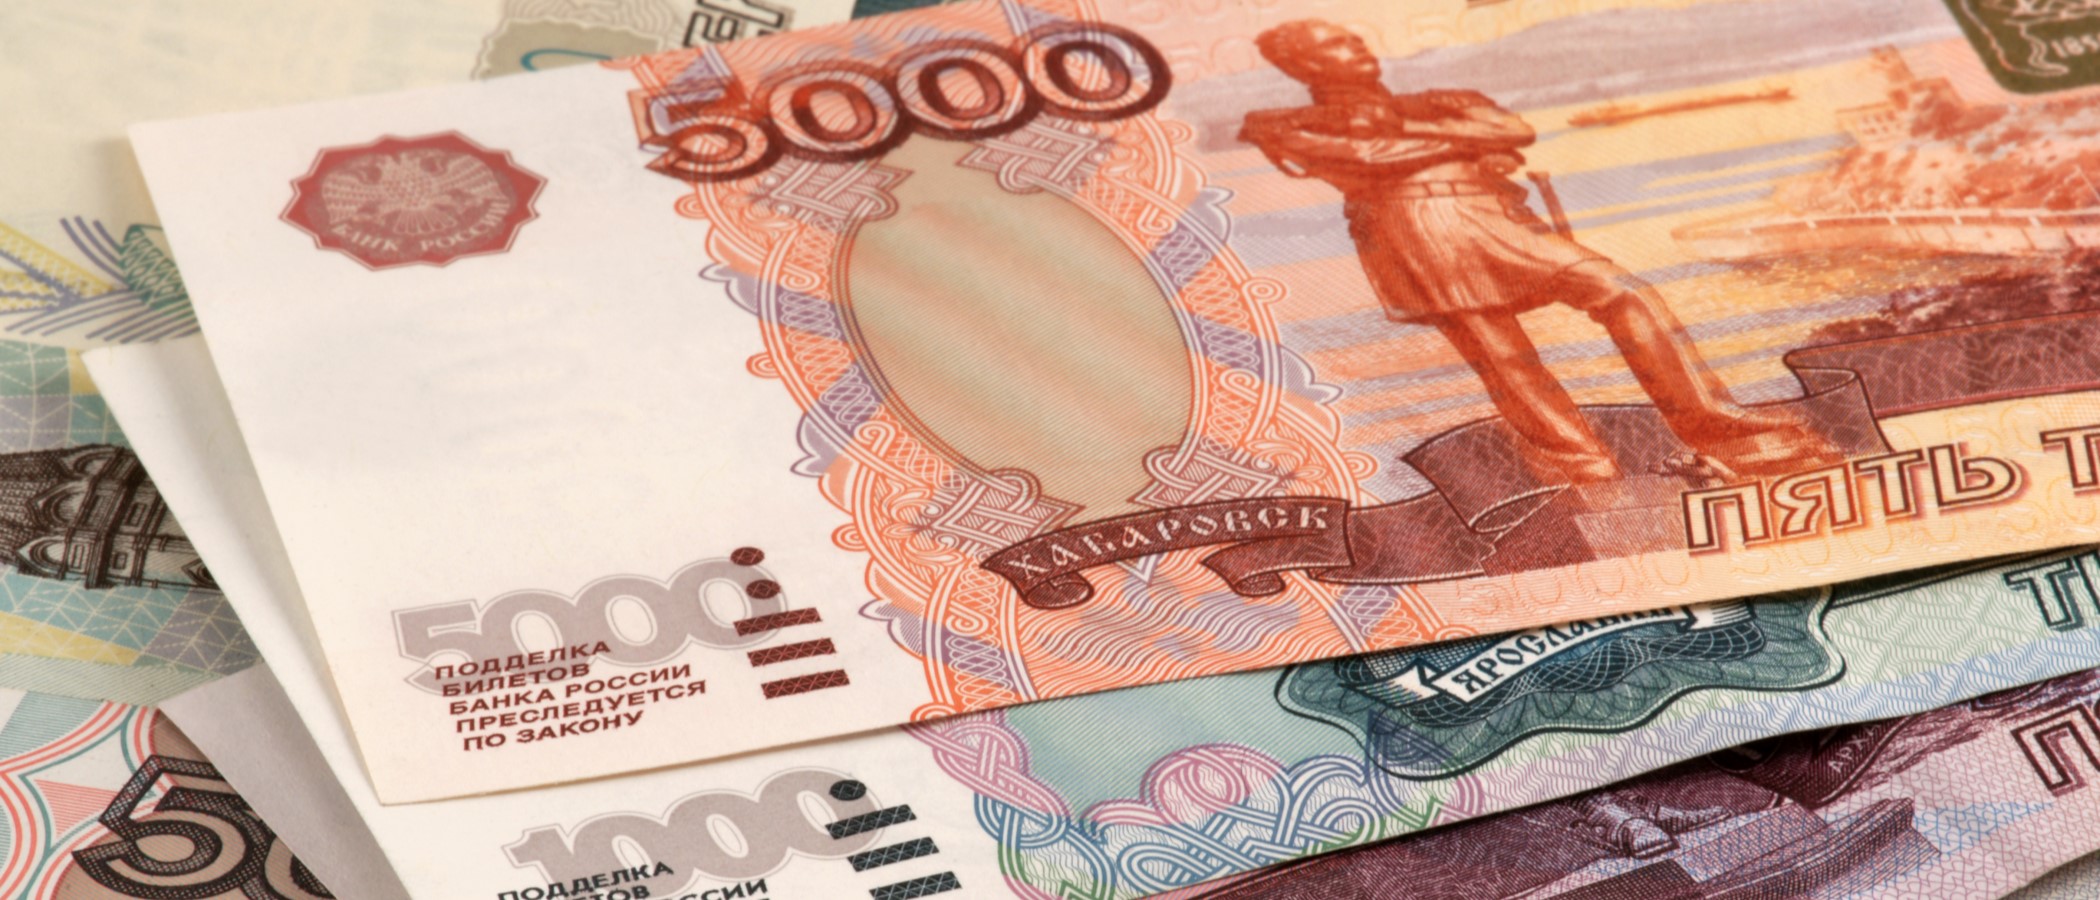 Rouble suffers worst fall since 1998 crisis